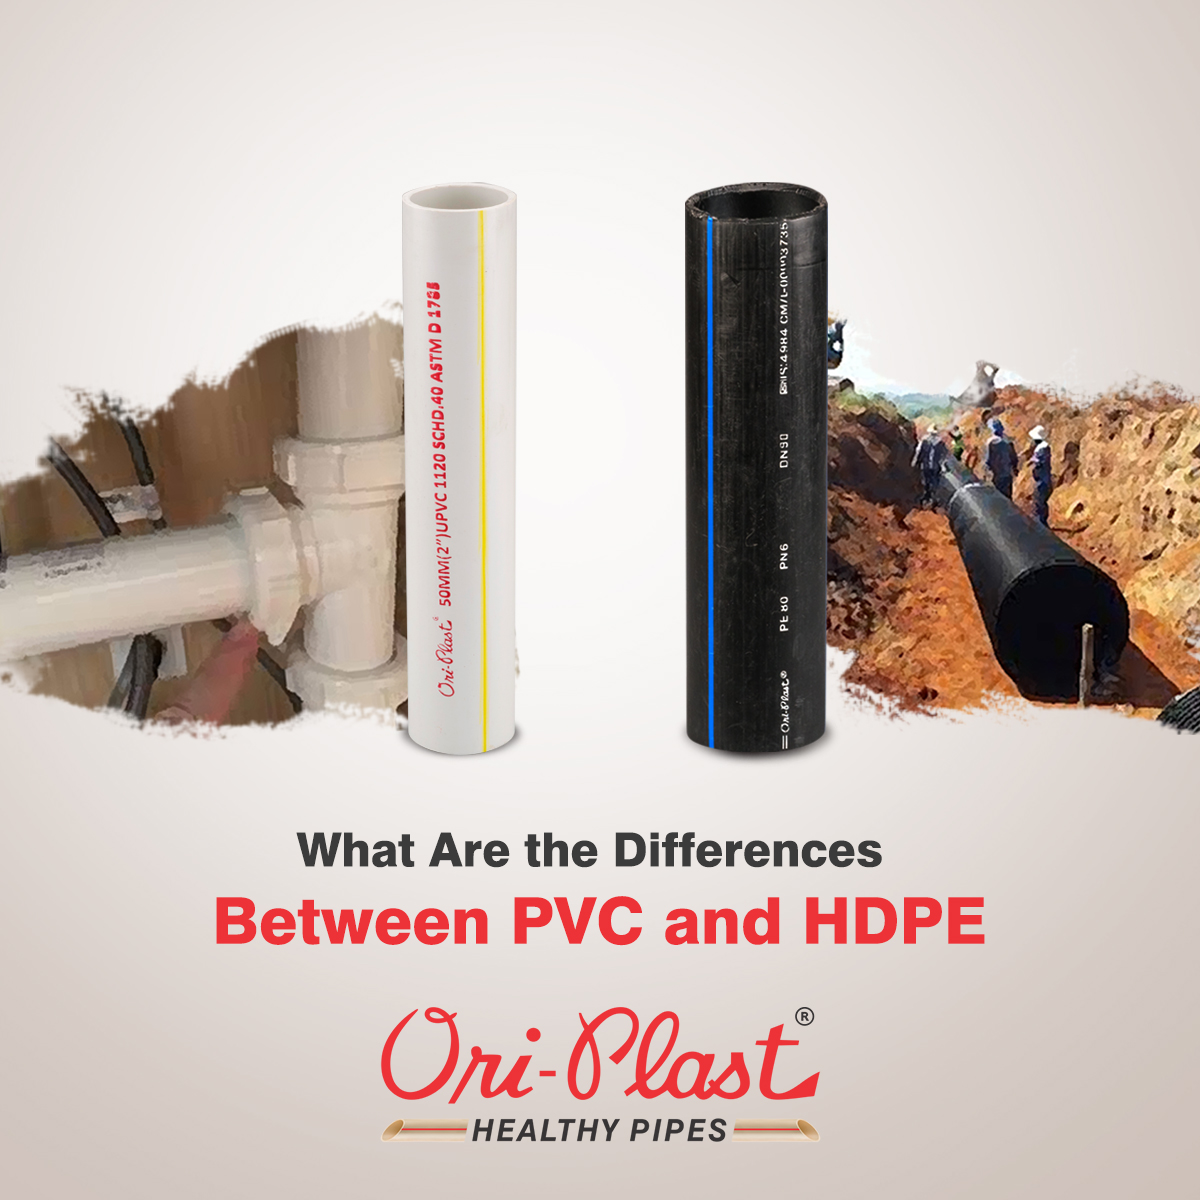 Differences Between PVC and HDPE